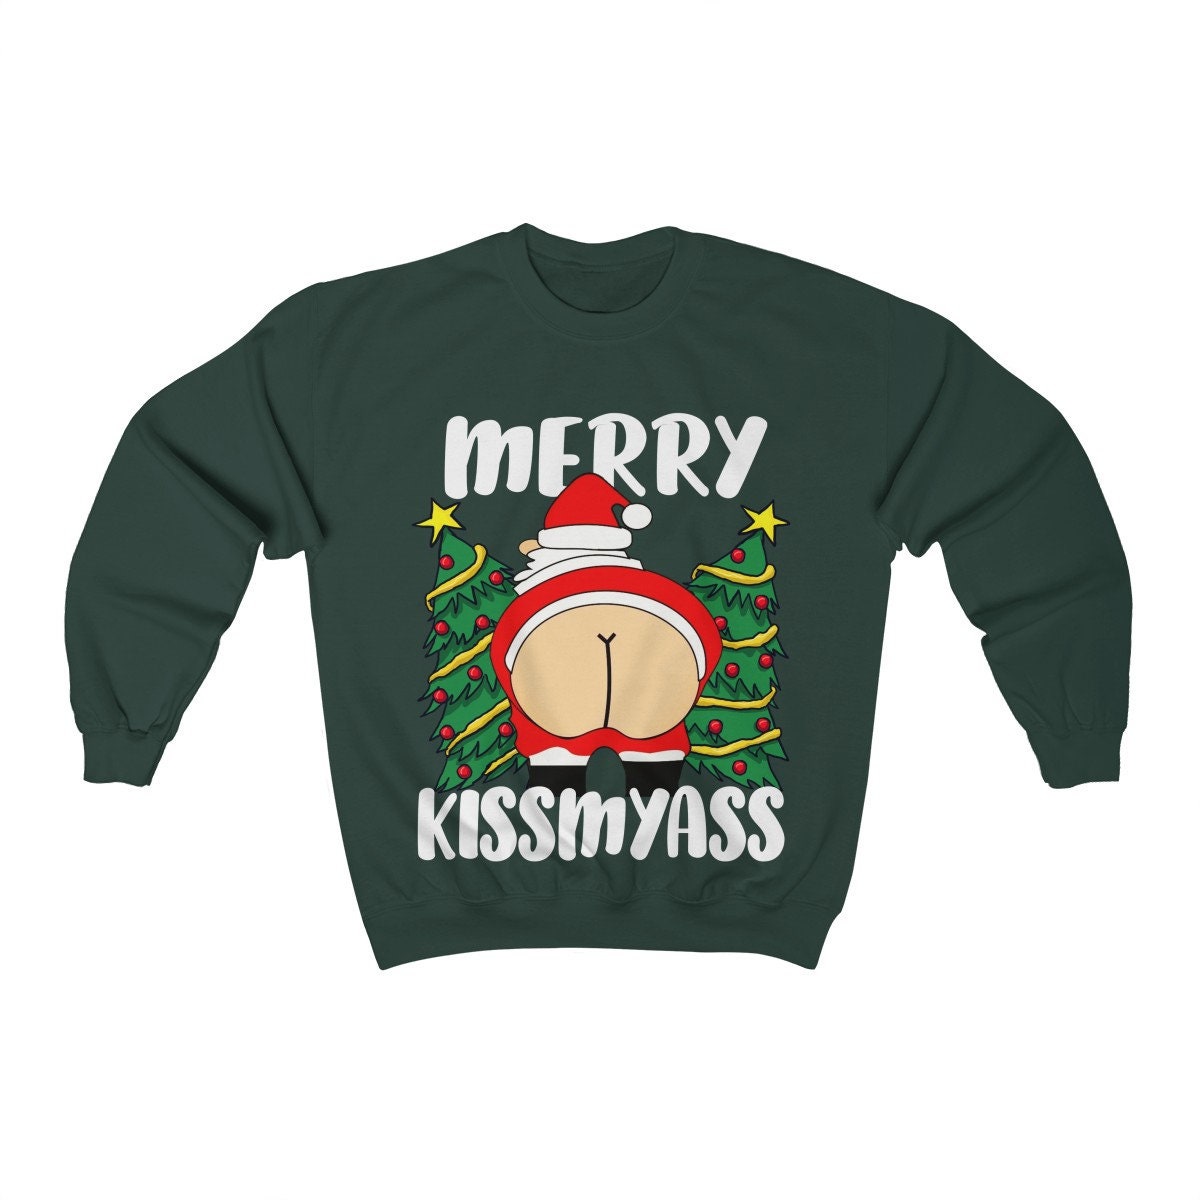 Merry Dickmas Dirty Ugly Christmas Sweater For Men Women - Trends Bedding